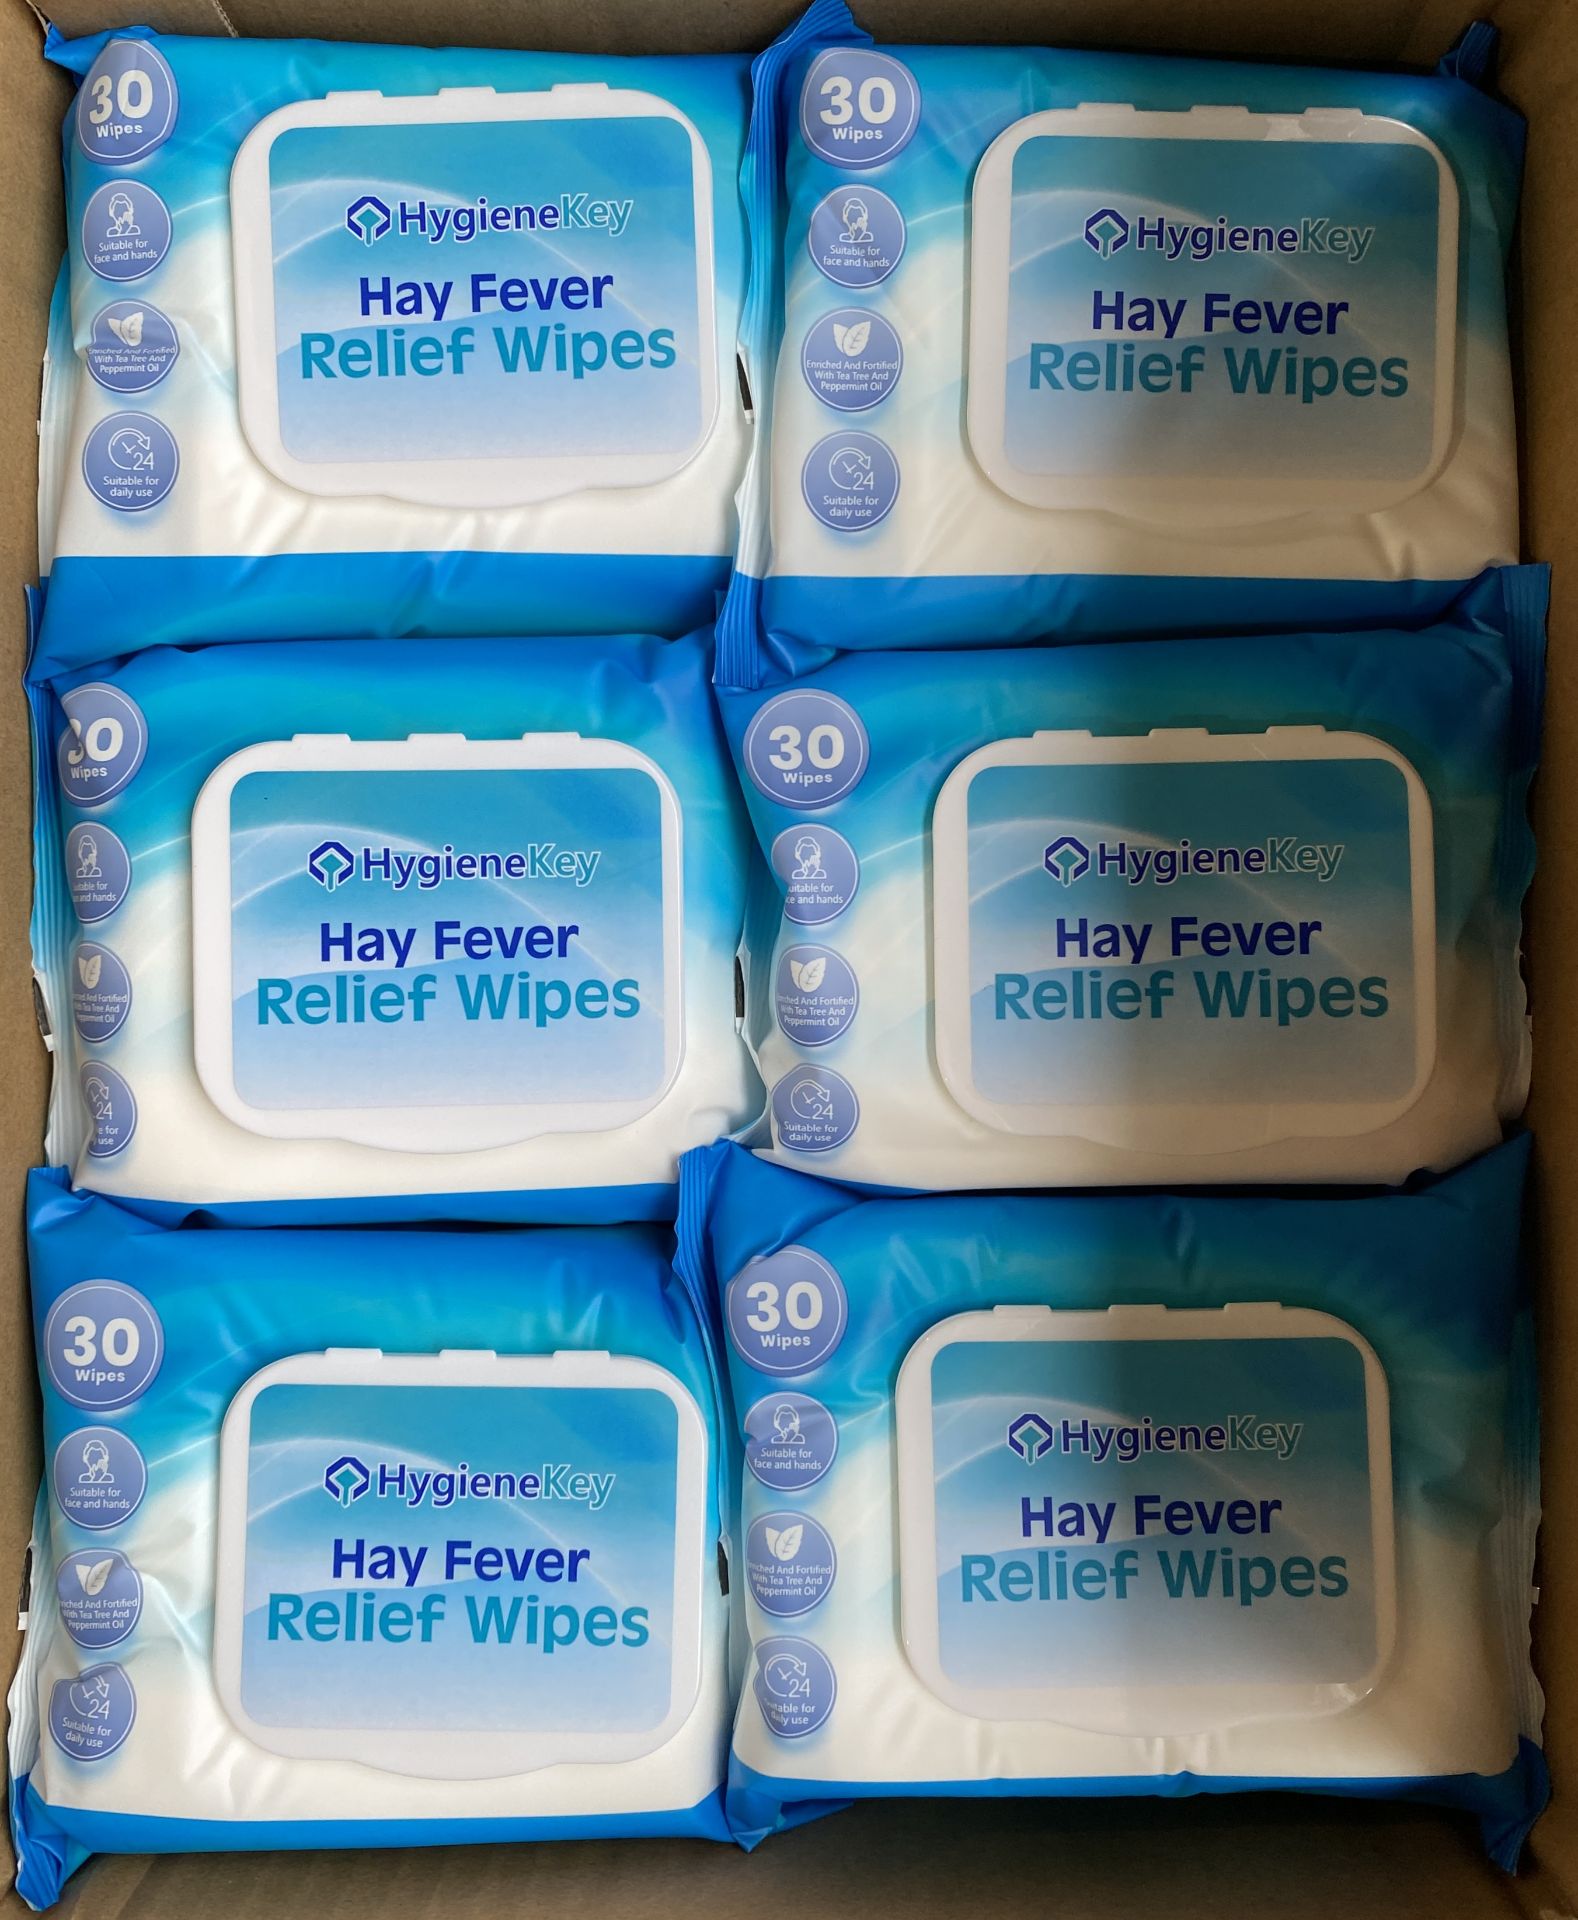 3600 x packs of Hygiene Key Hay Fever Relief Wipes (30 x wipes per pack - expiry date: 30/05/24) - - Image 2 of 8